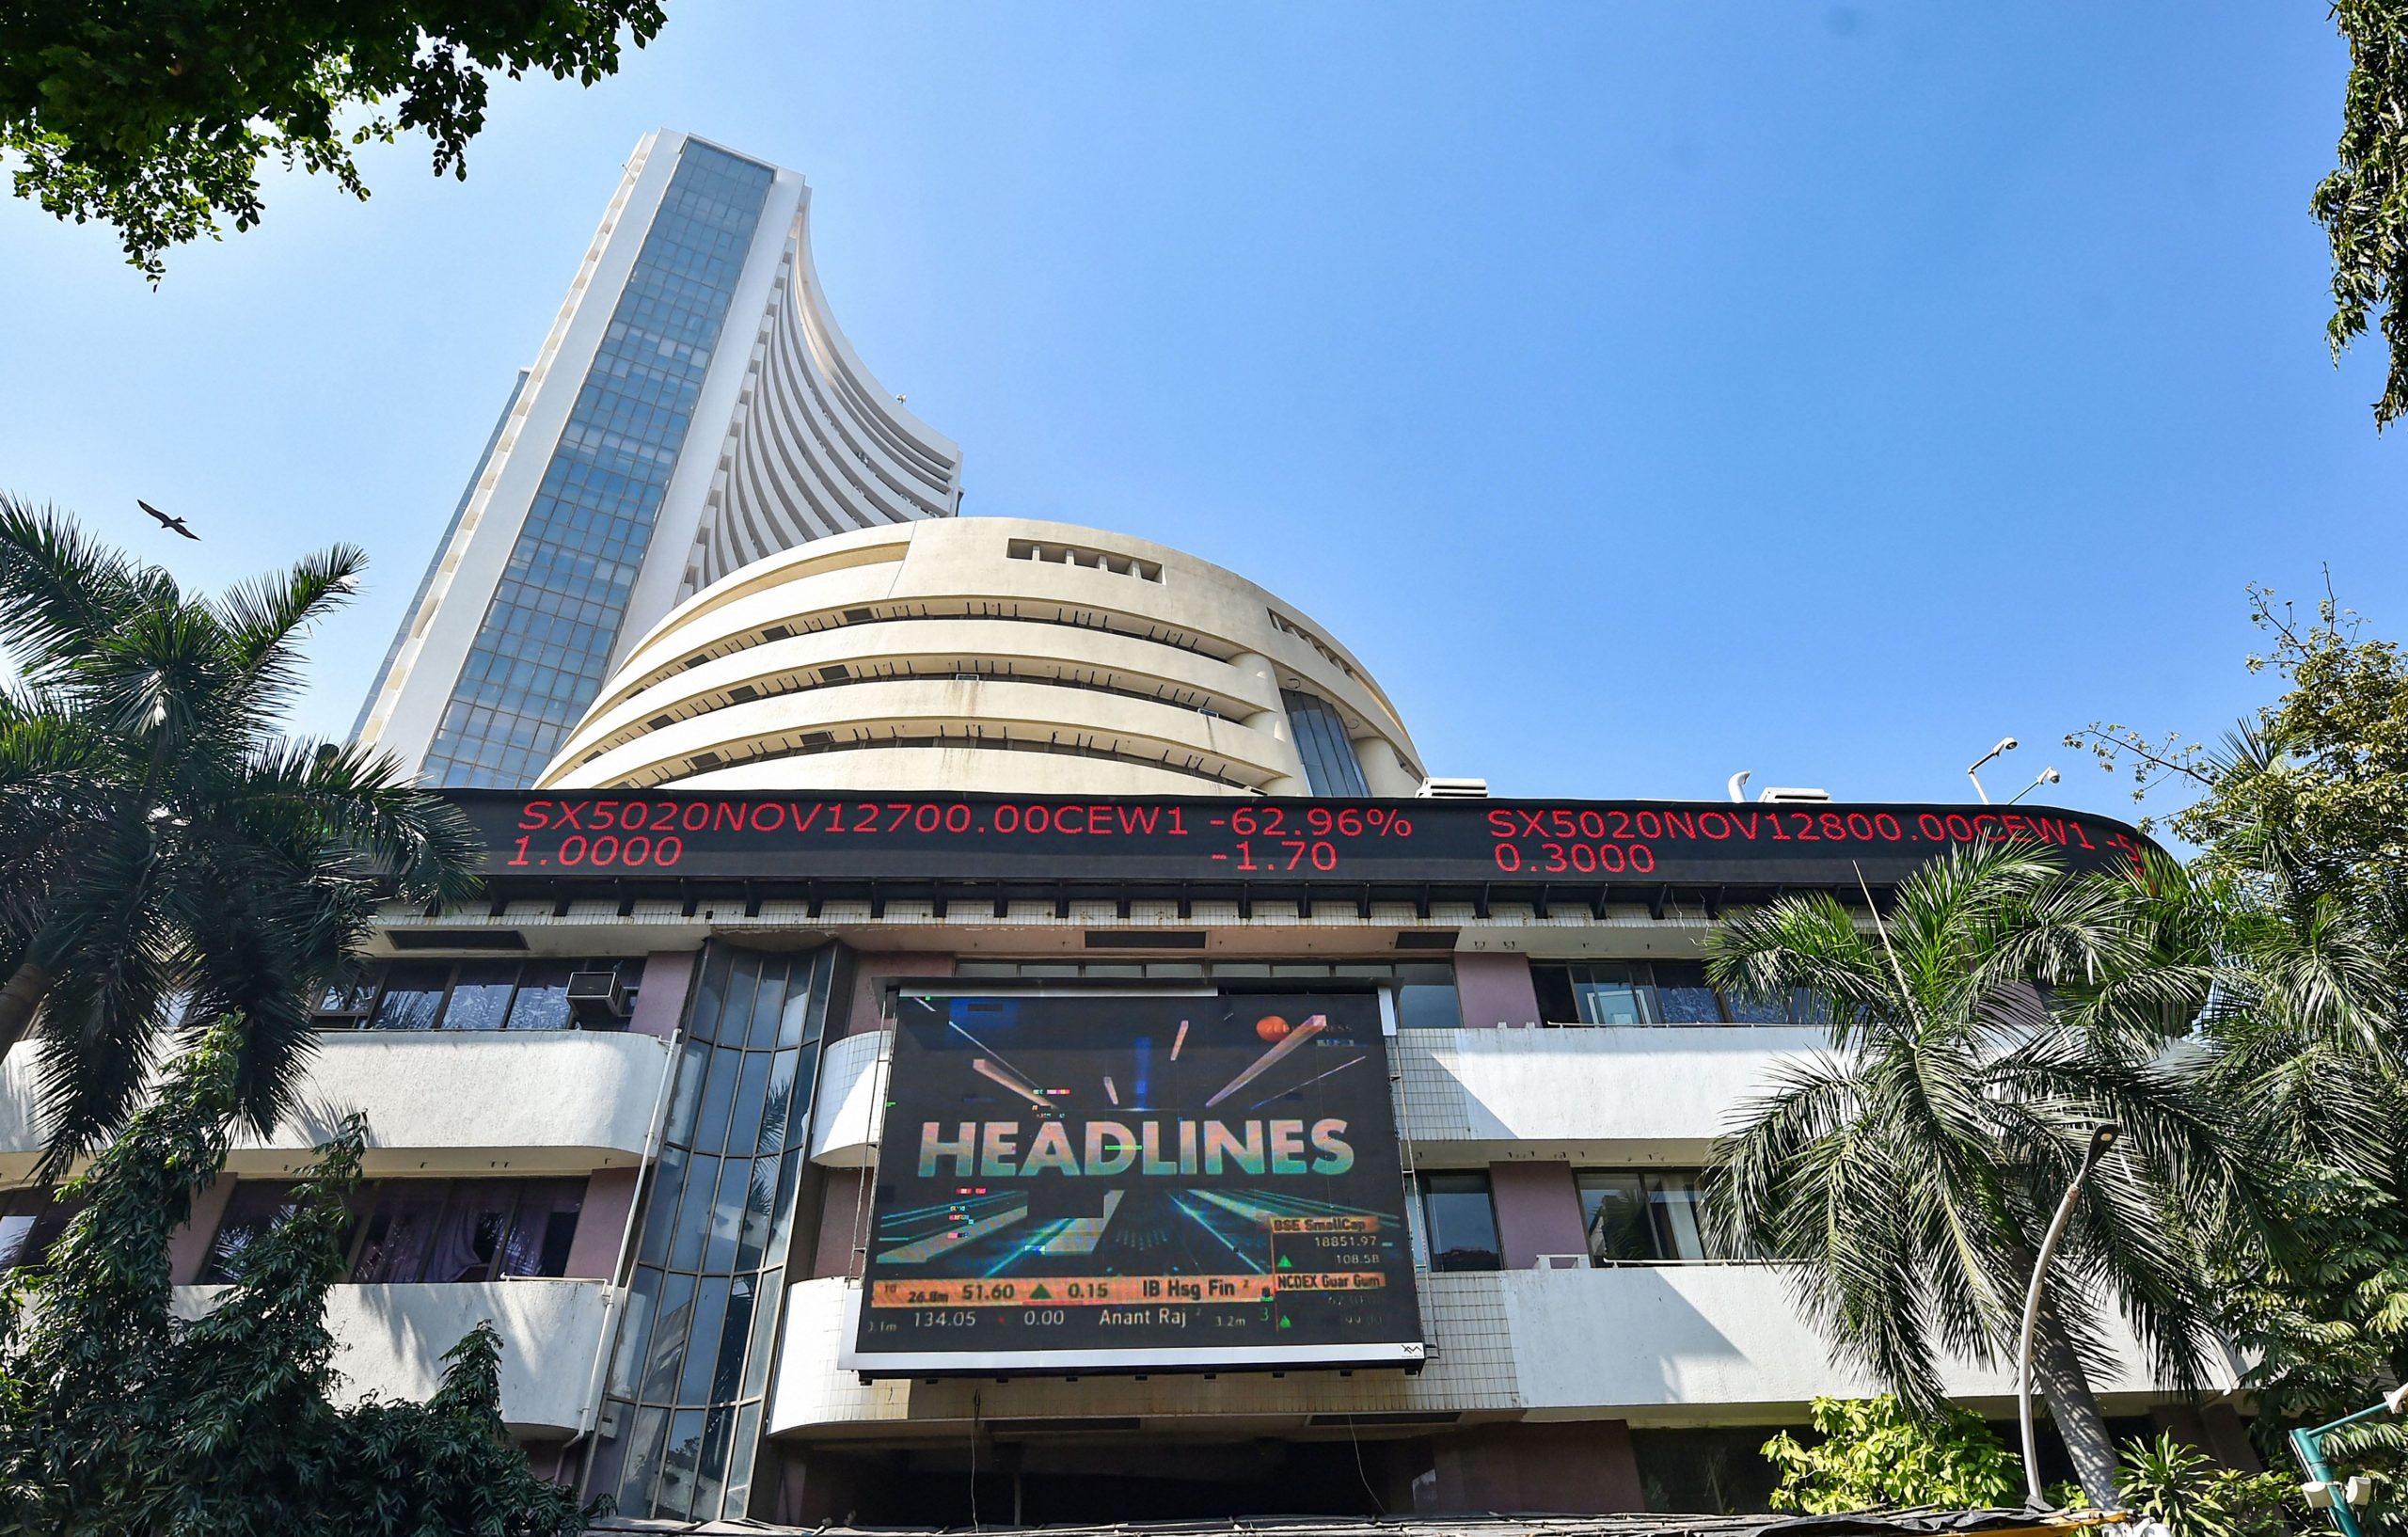 Trending Stocks: Suven, Gail, Sun Tv, SJVN and others in the news today